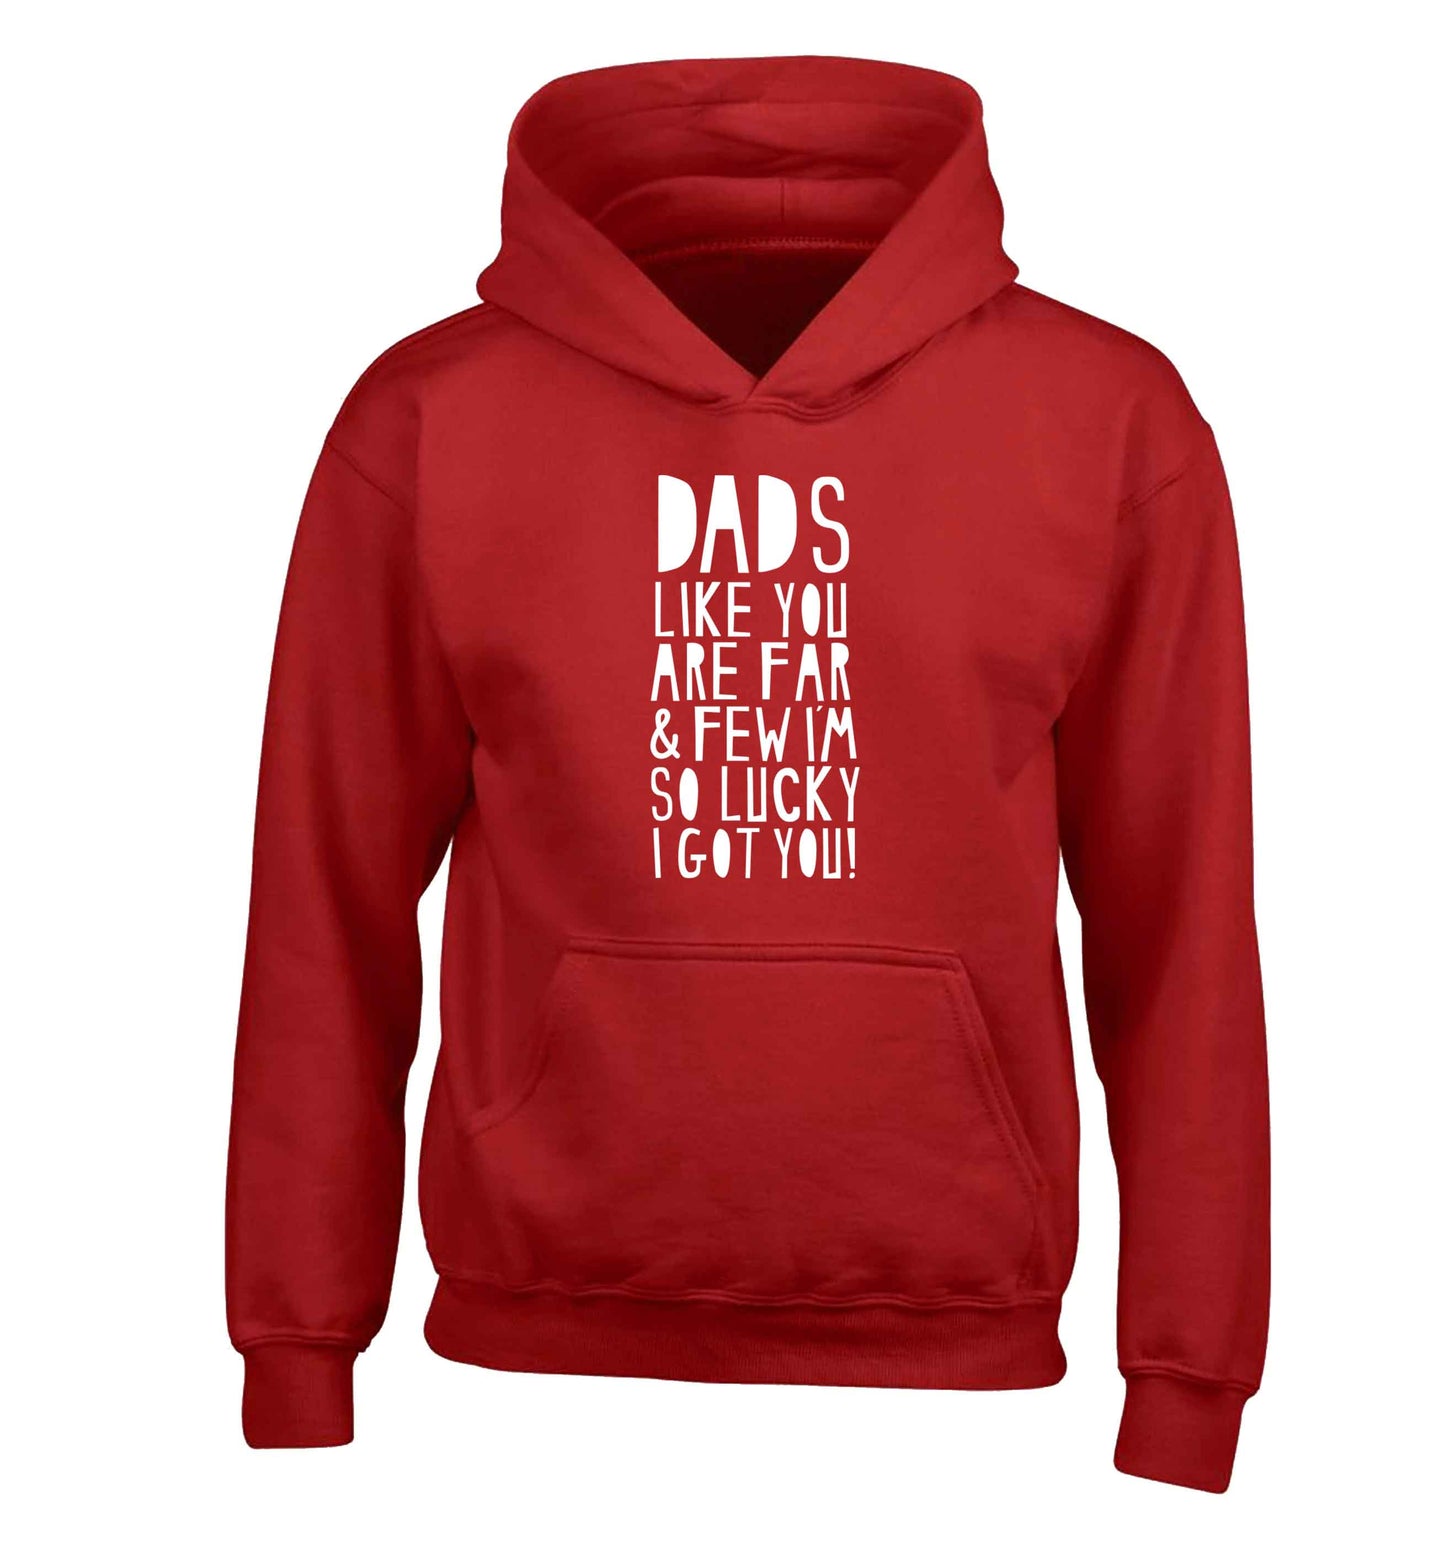 Dads like you are far and few I'm so luck I got you! children's red hoodie 12-13 Years